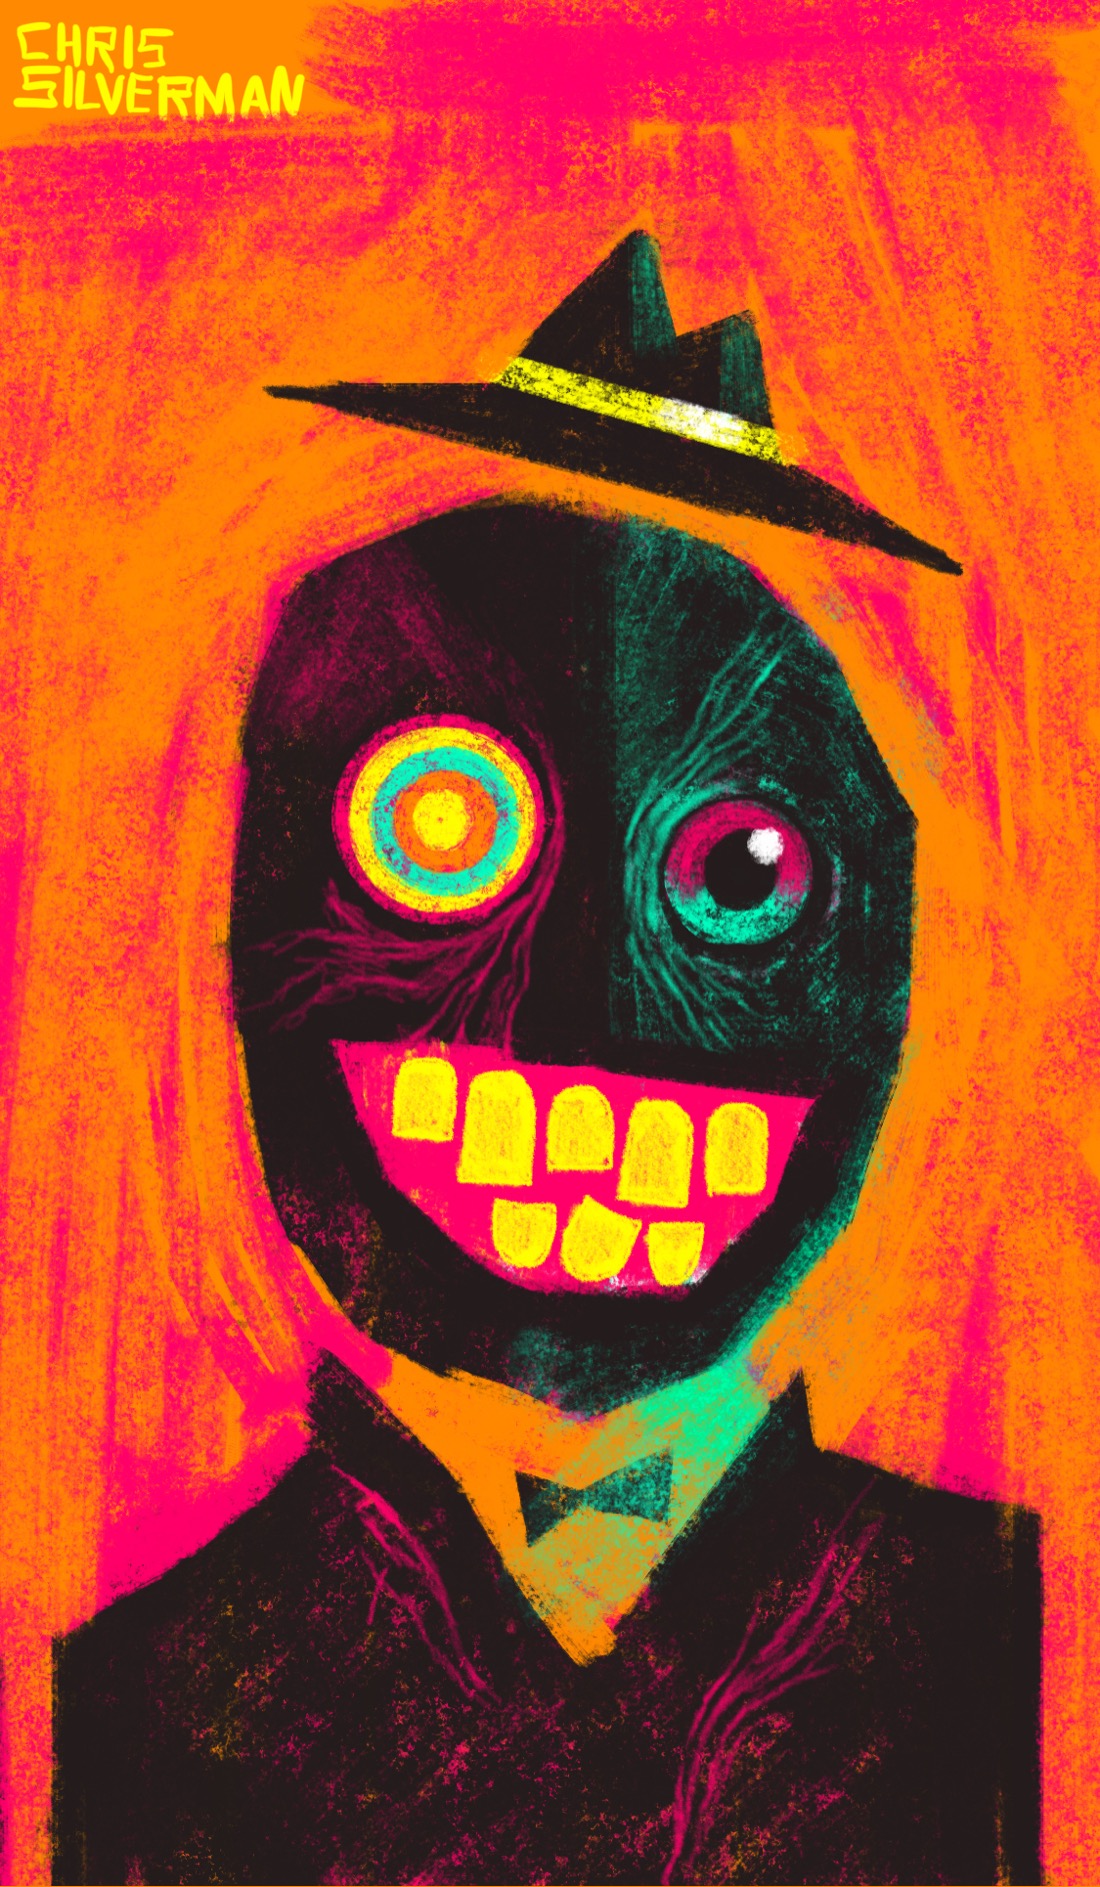 A disturbing figure wearing a black coat and a black bowtie, and a round black head with no ears, no nose, and a wide, neon-pink mouth with yellow teeth. The figure has two round eyes, both different colors: the right eye is concentric circles of red, yellow, blue, and orange; the left eye is crimson and blue. The face has wrinkles on it as though it is made of leather. The figure is wearing a cartoonish fedora-esque hat. The drawing is on a pink and orange background.